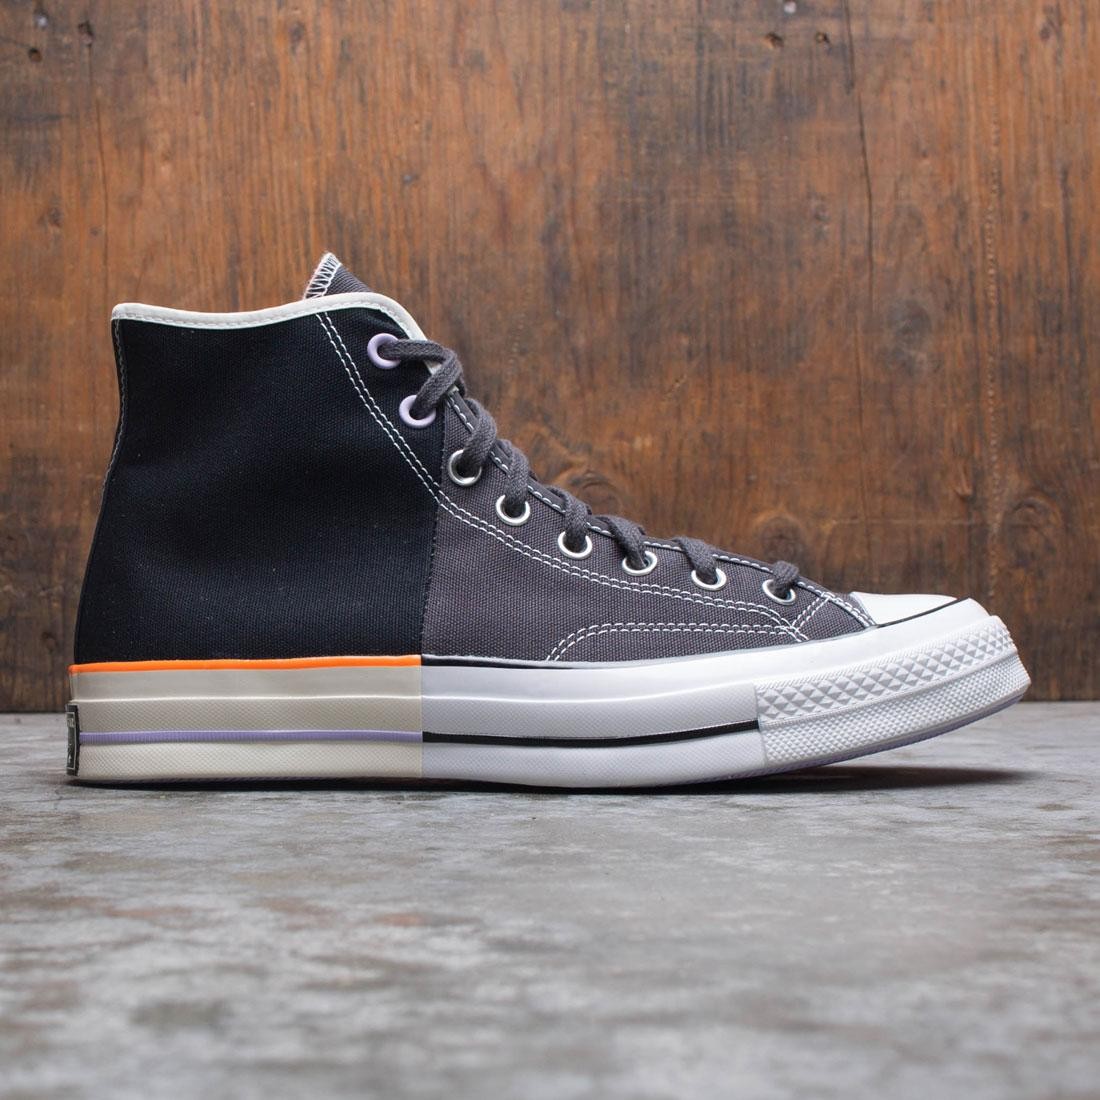 Converse is back in force with another new offering of the